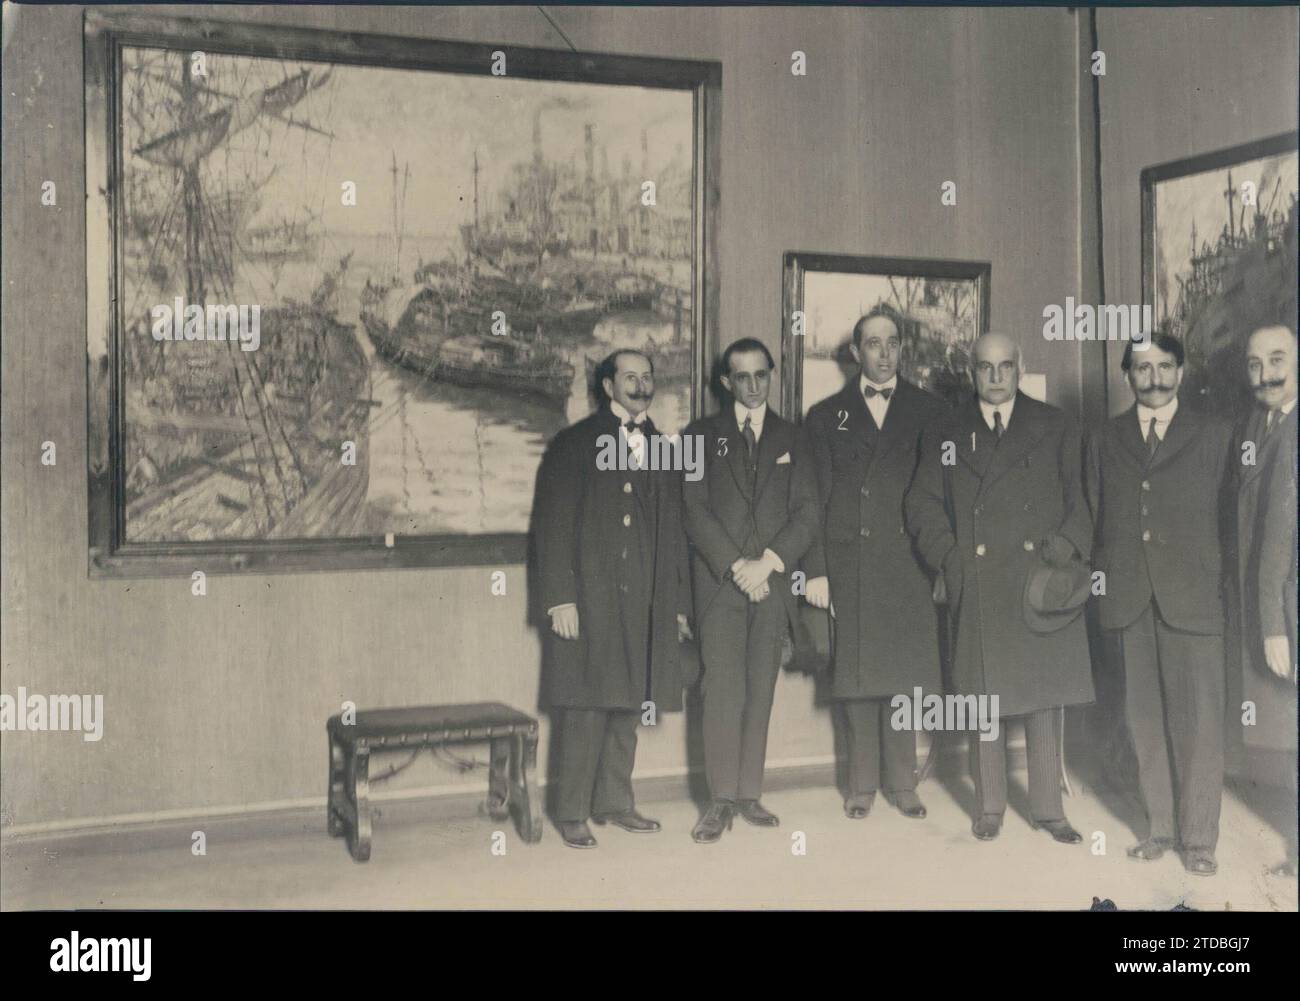 04/11/1923. Madrid. In the hall of the Fine Arts circle. The ambassador of the Argentine Republic (1) and the Minister of Public Instruction (2) at the exhibition of Works by the Buenos Aires painter Benito Quinquela (3), Inaugurated yesterday. Credit: Album / Archivo ABC / José Zegri Stock Photo